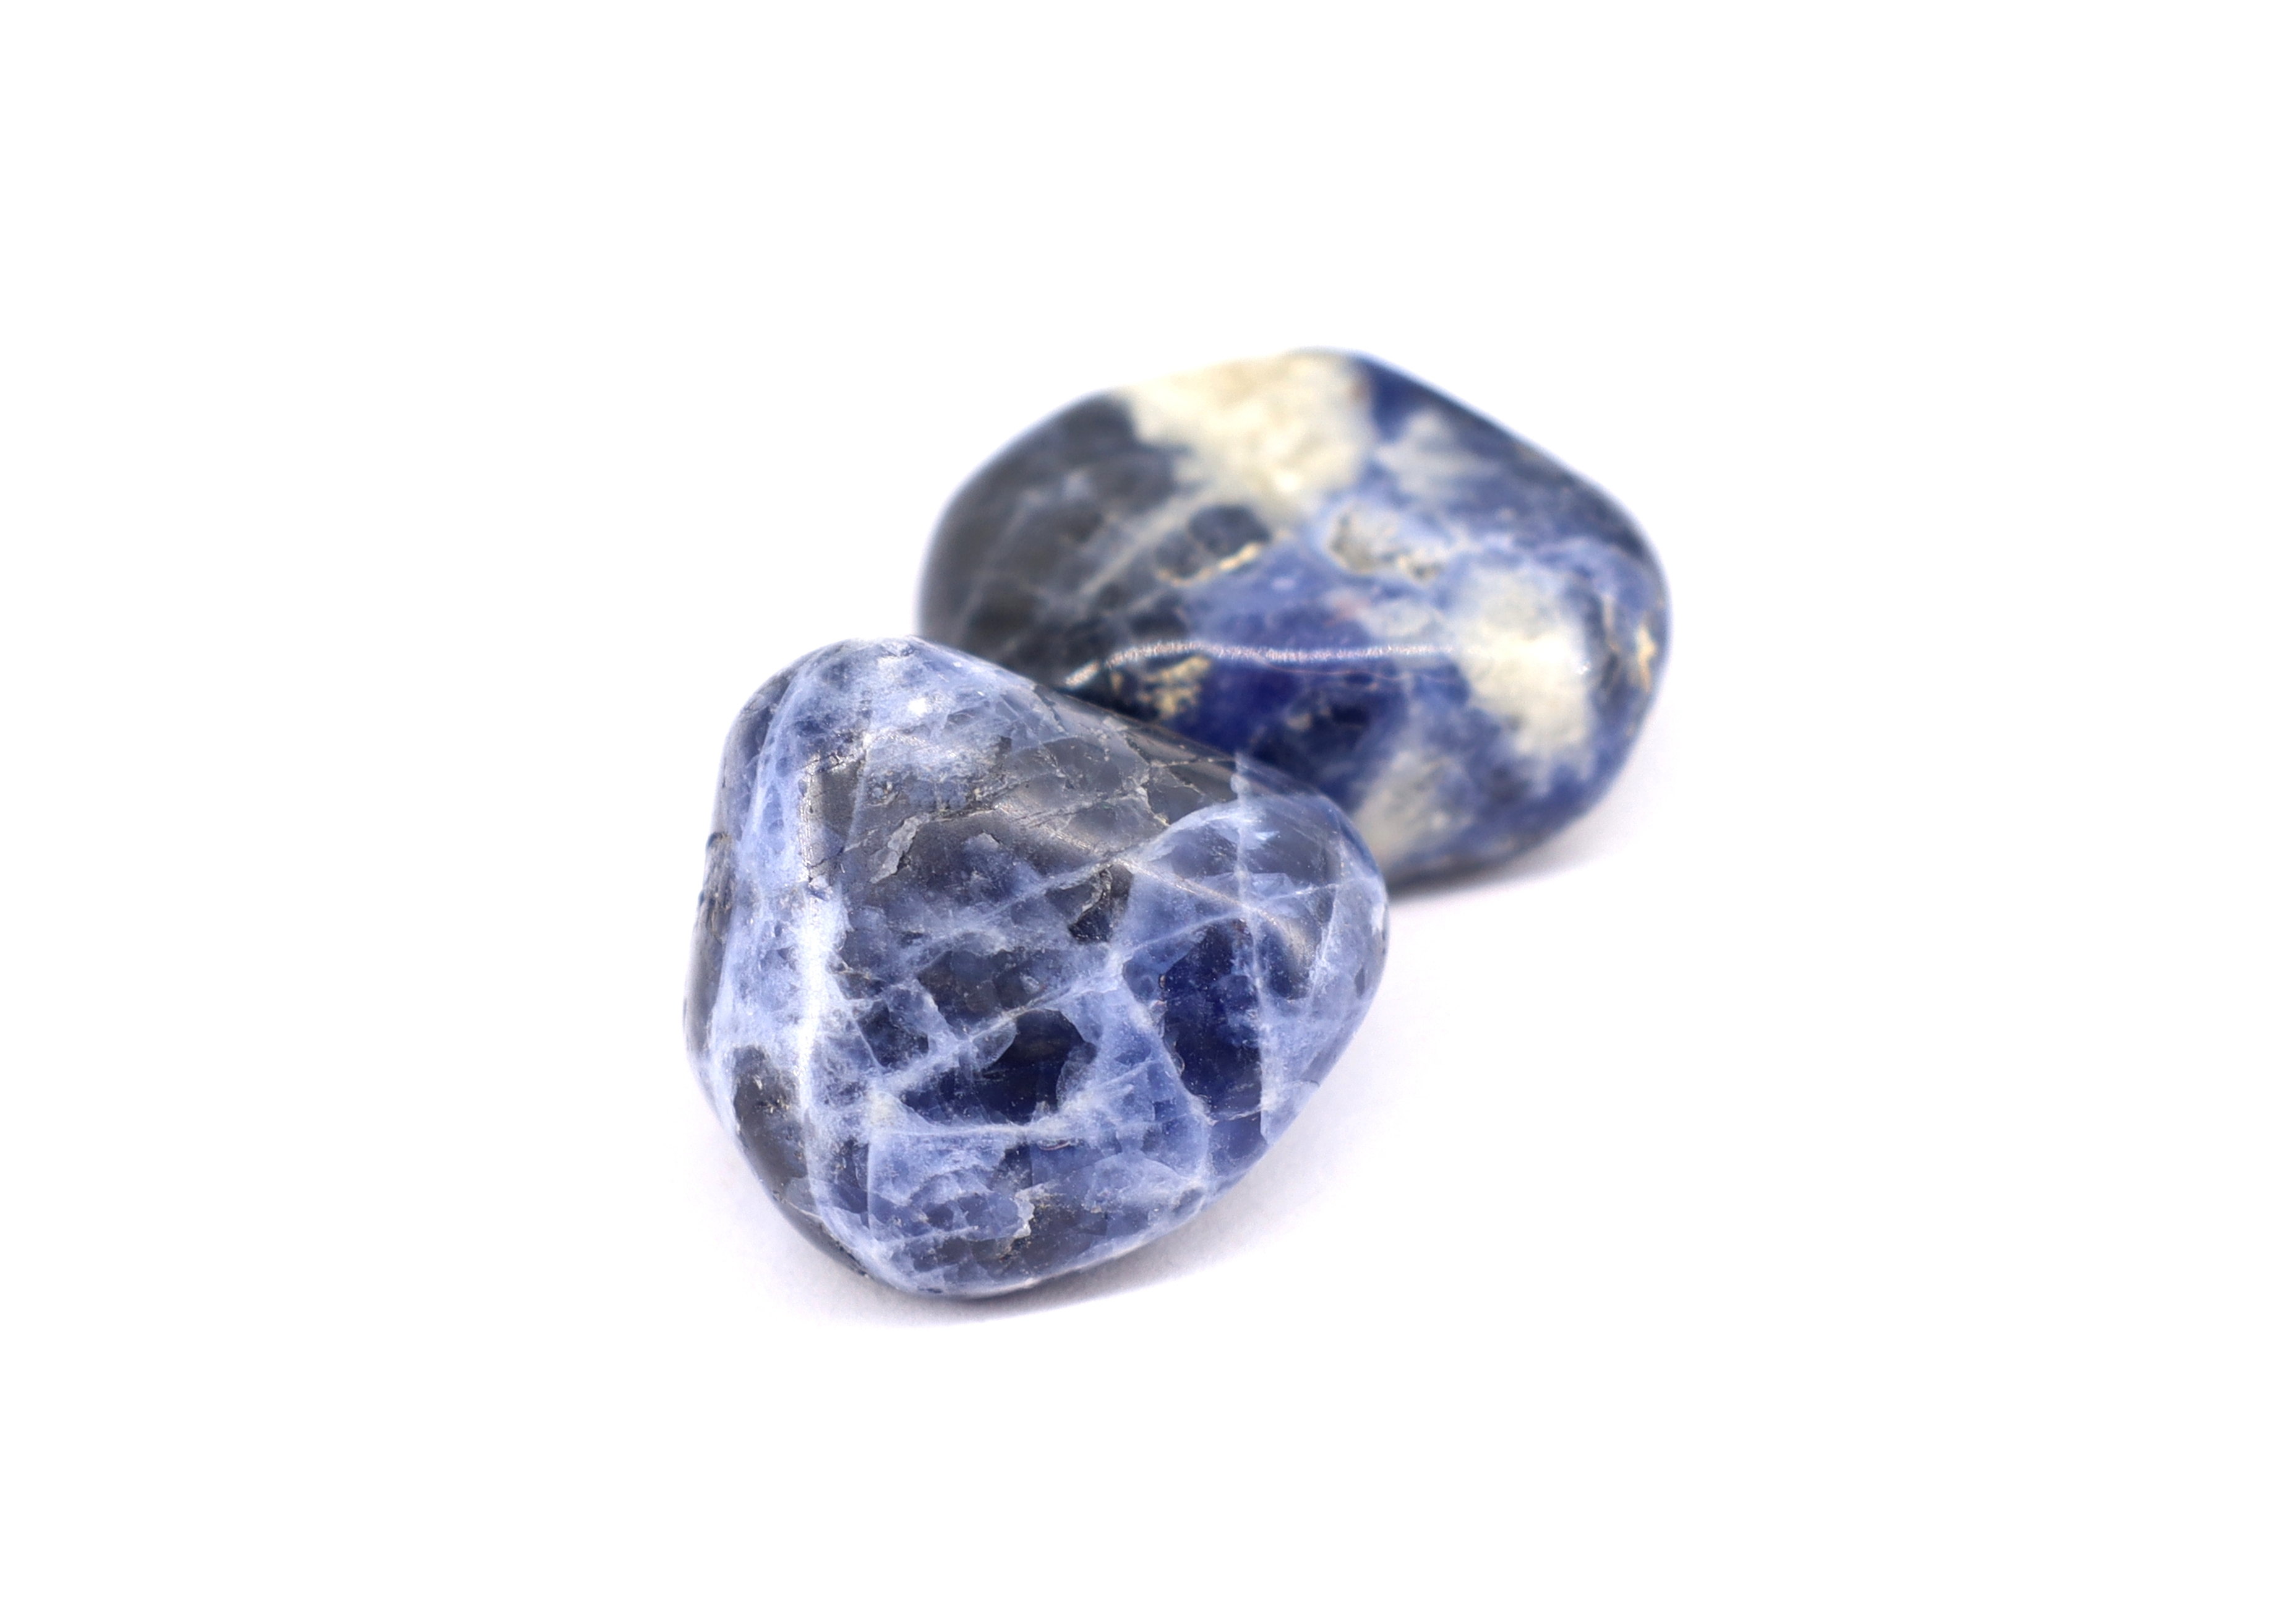 Two pieces of Sodalite on a white background